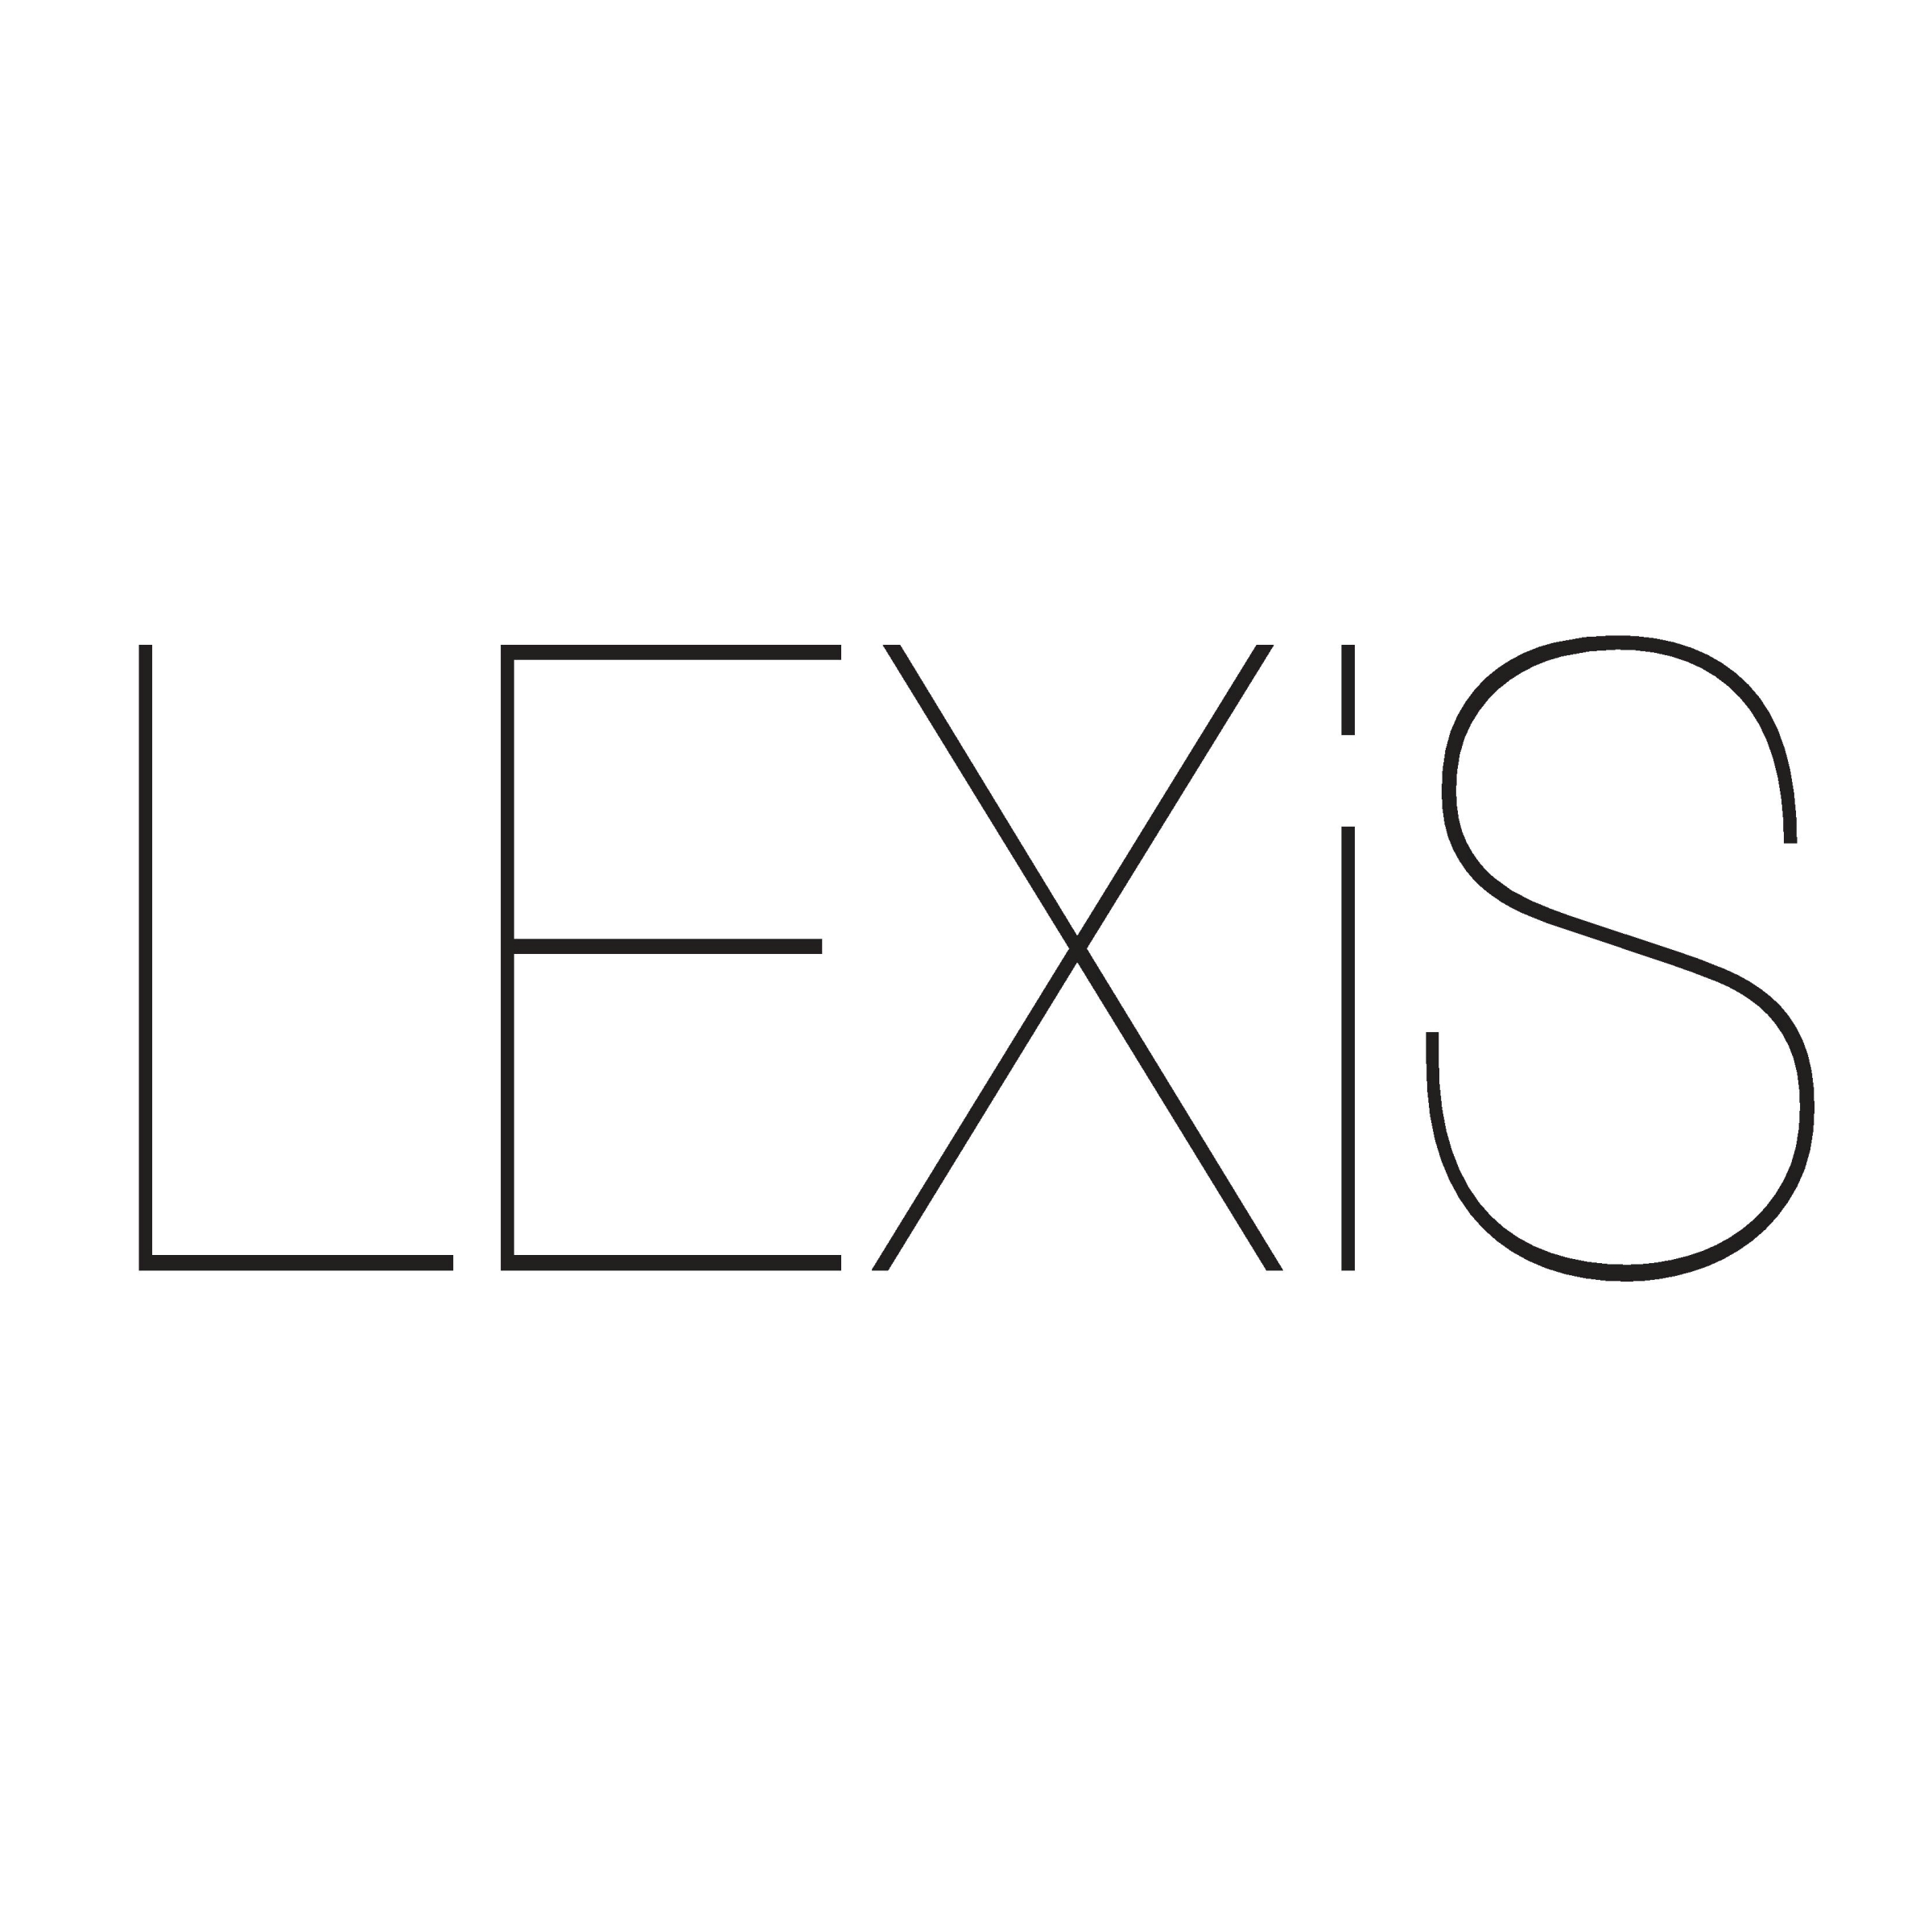 LEXiS collection